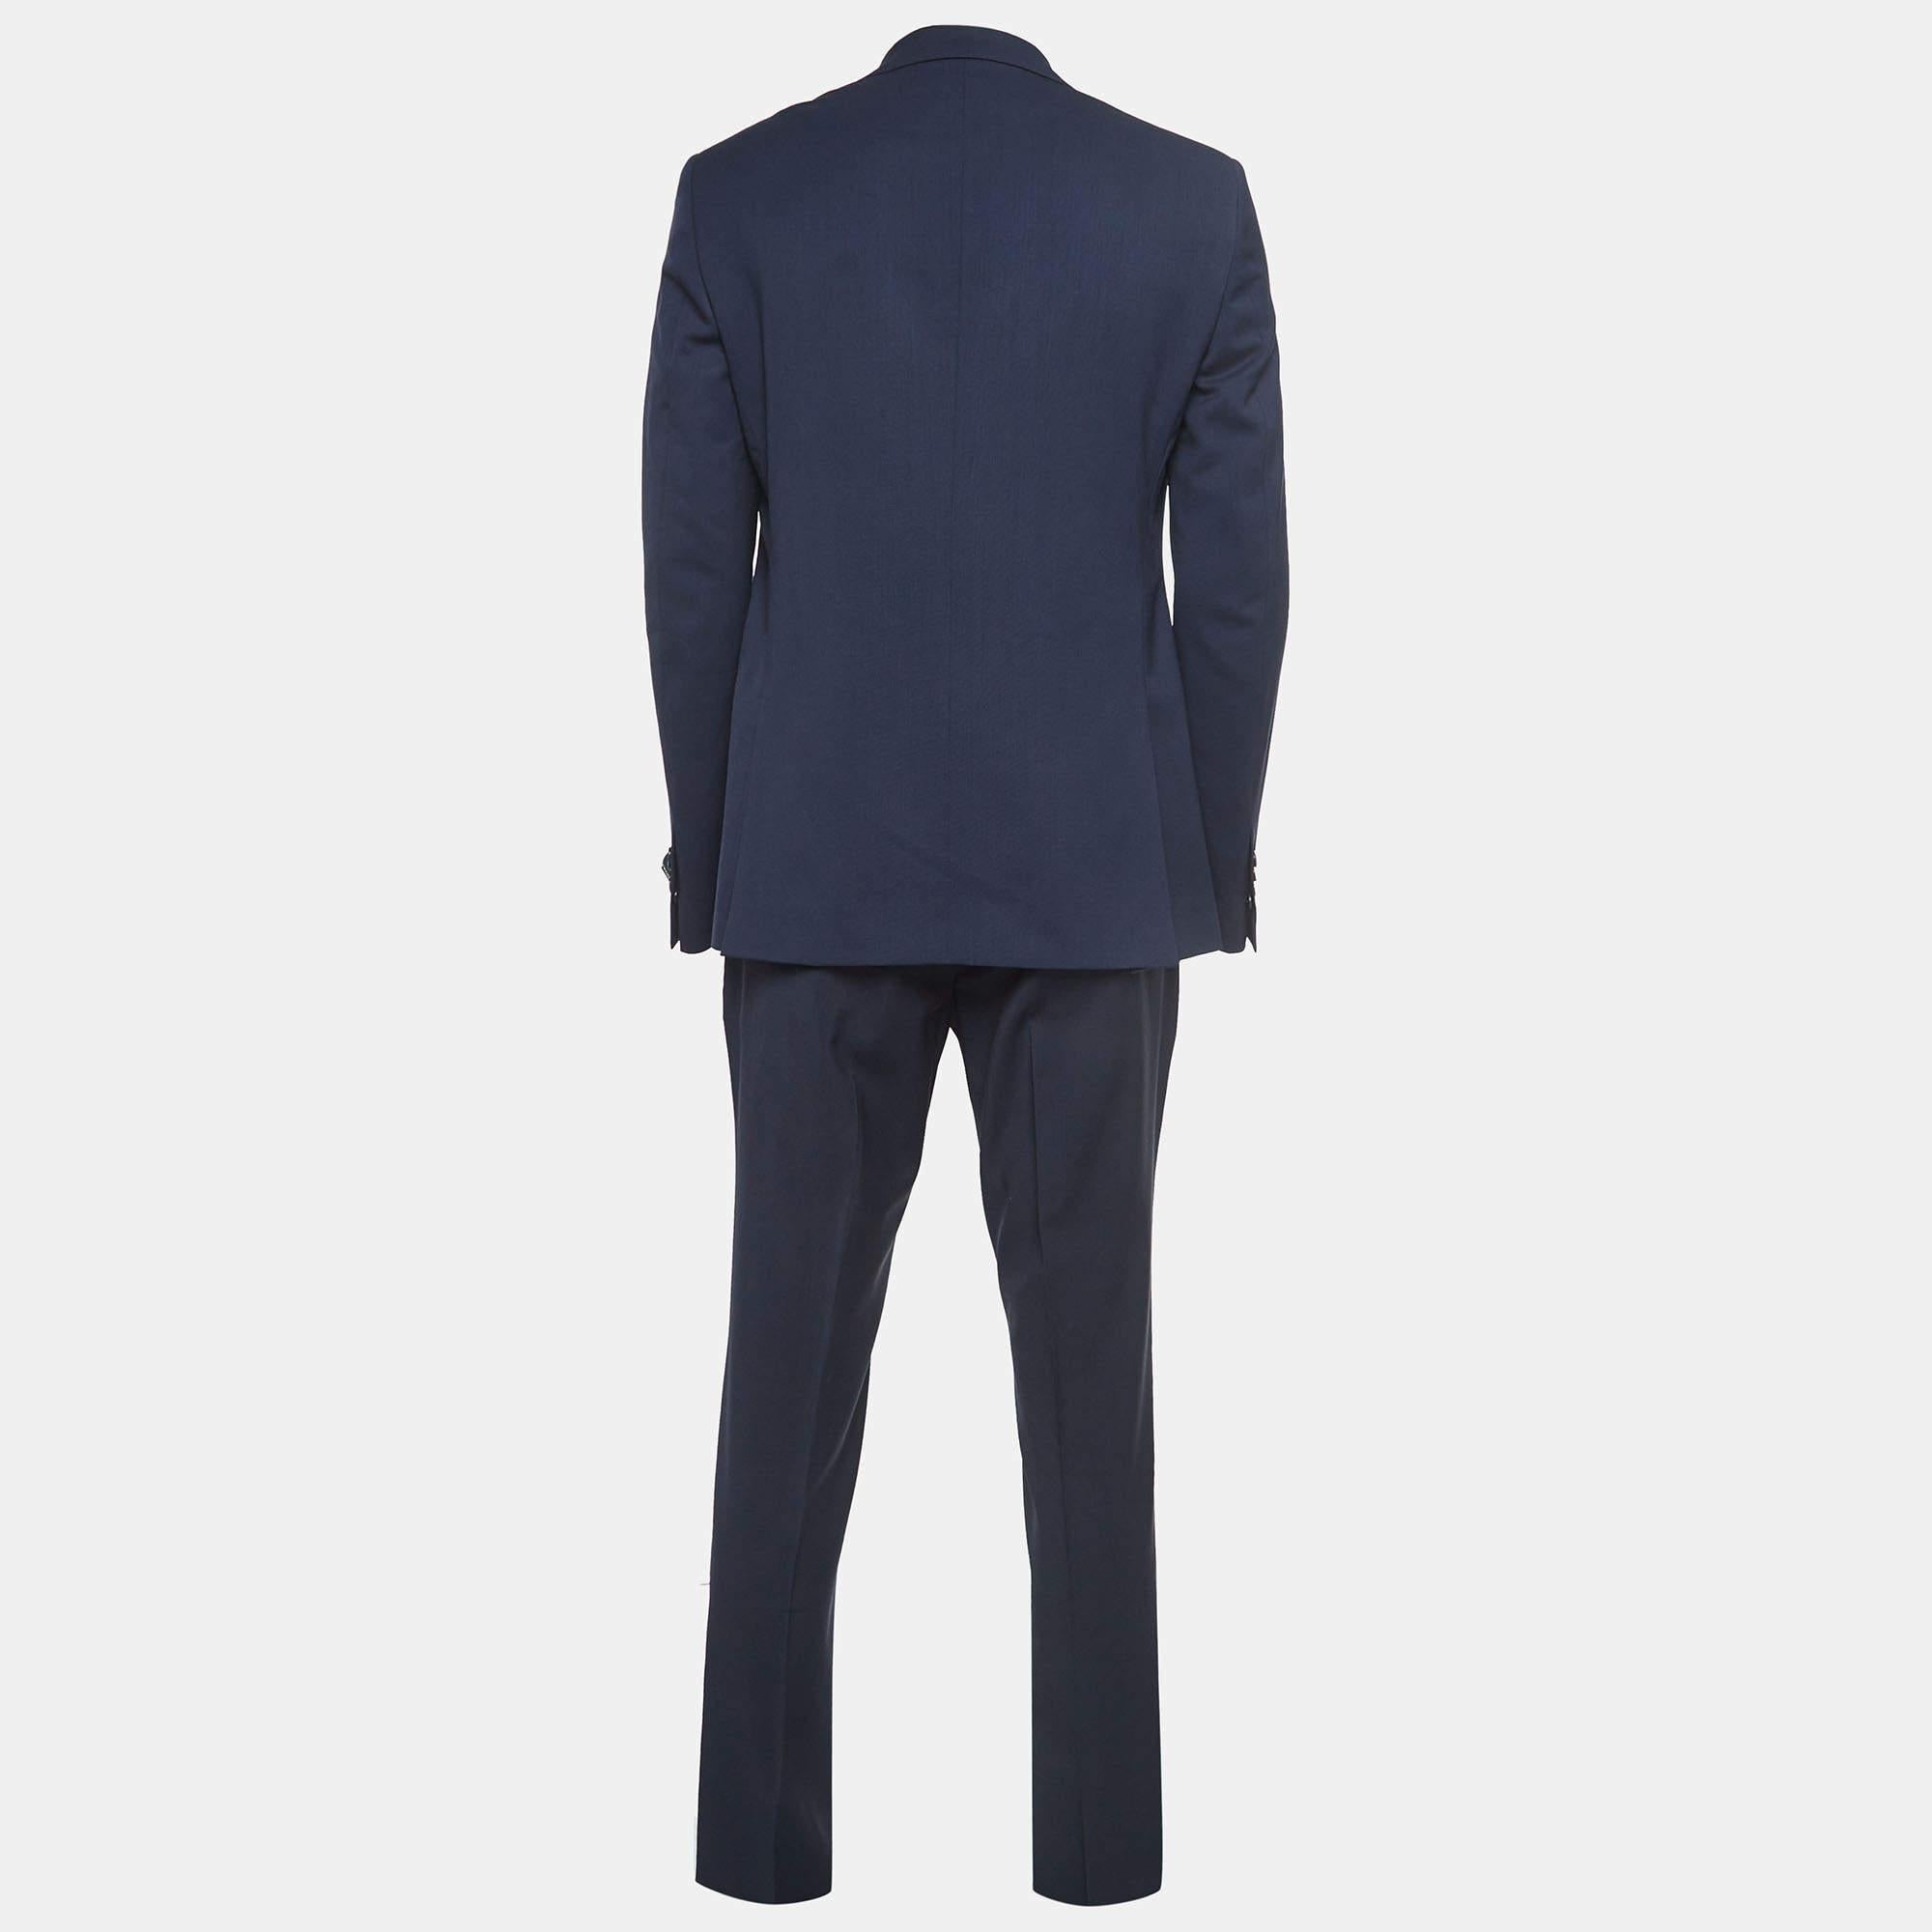 Characterized by impeccable tailoring, a good fit, and the use of quality materials, this suit set will help you serve dapper looks. Style it with oxfords or loafers to bring out the stylish appeal of the creation.

Includes: Original Dustbag, Brand